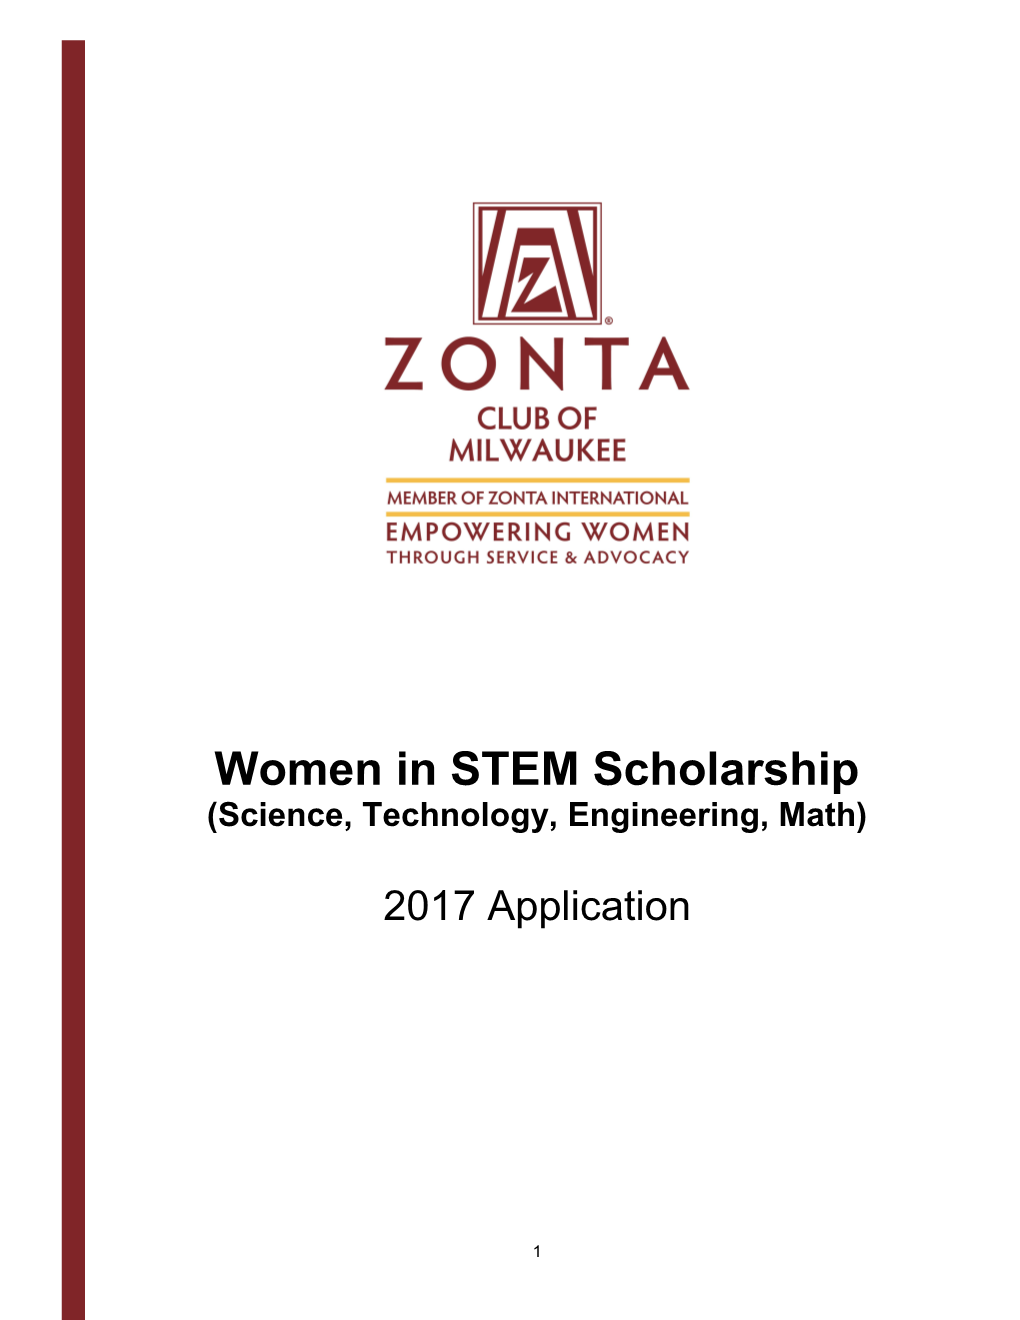 A Scholarship from the Zonta Club of Milwaukee